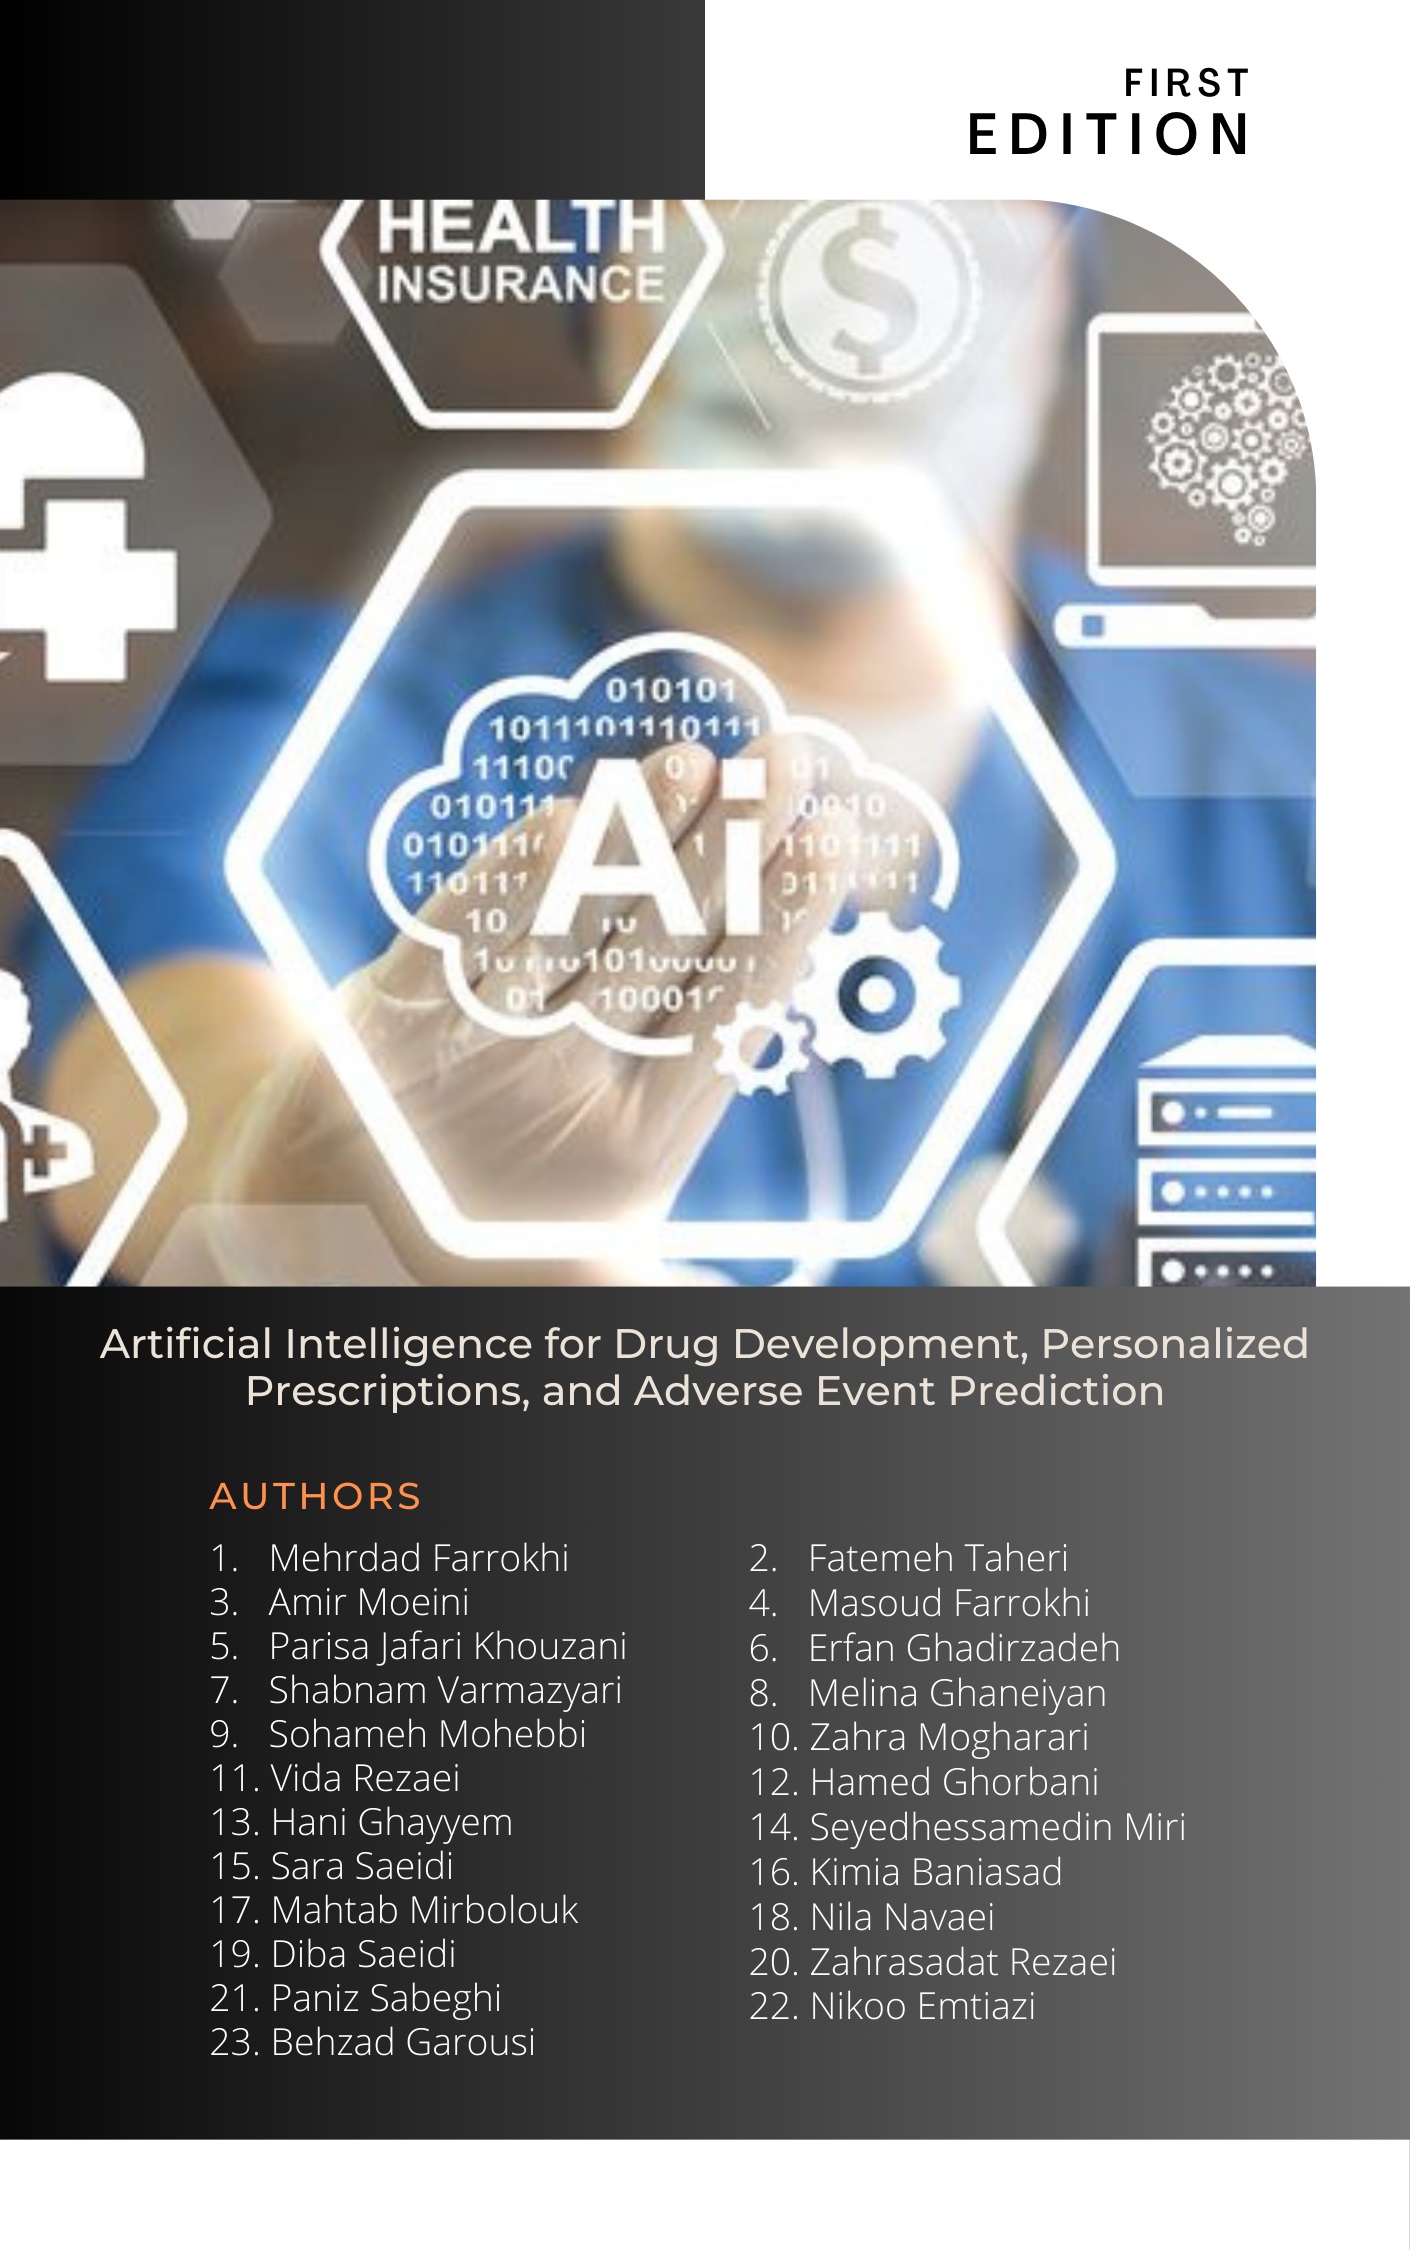 Artificial Intelligence for Drug Development, Personalized Prescriptions, and Adverse Event Prediction